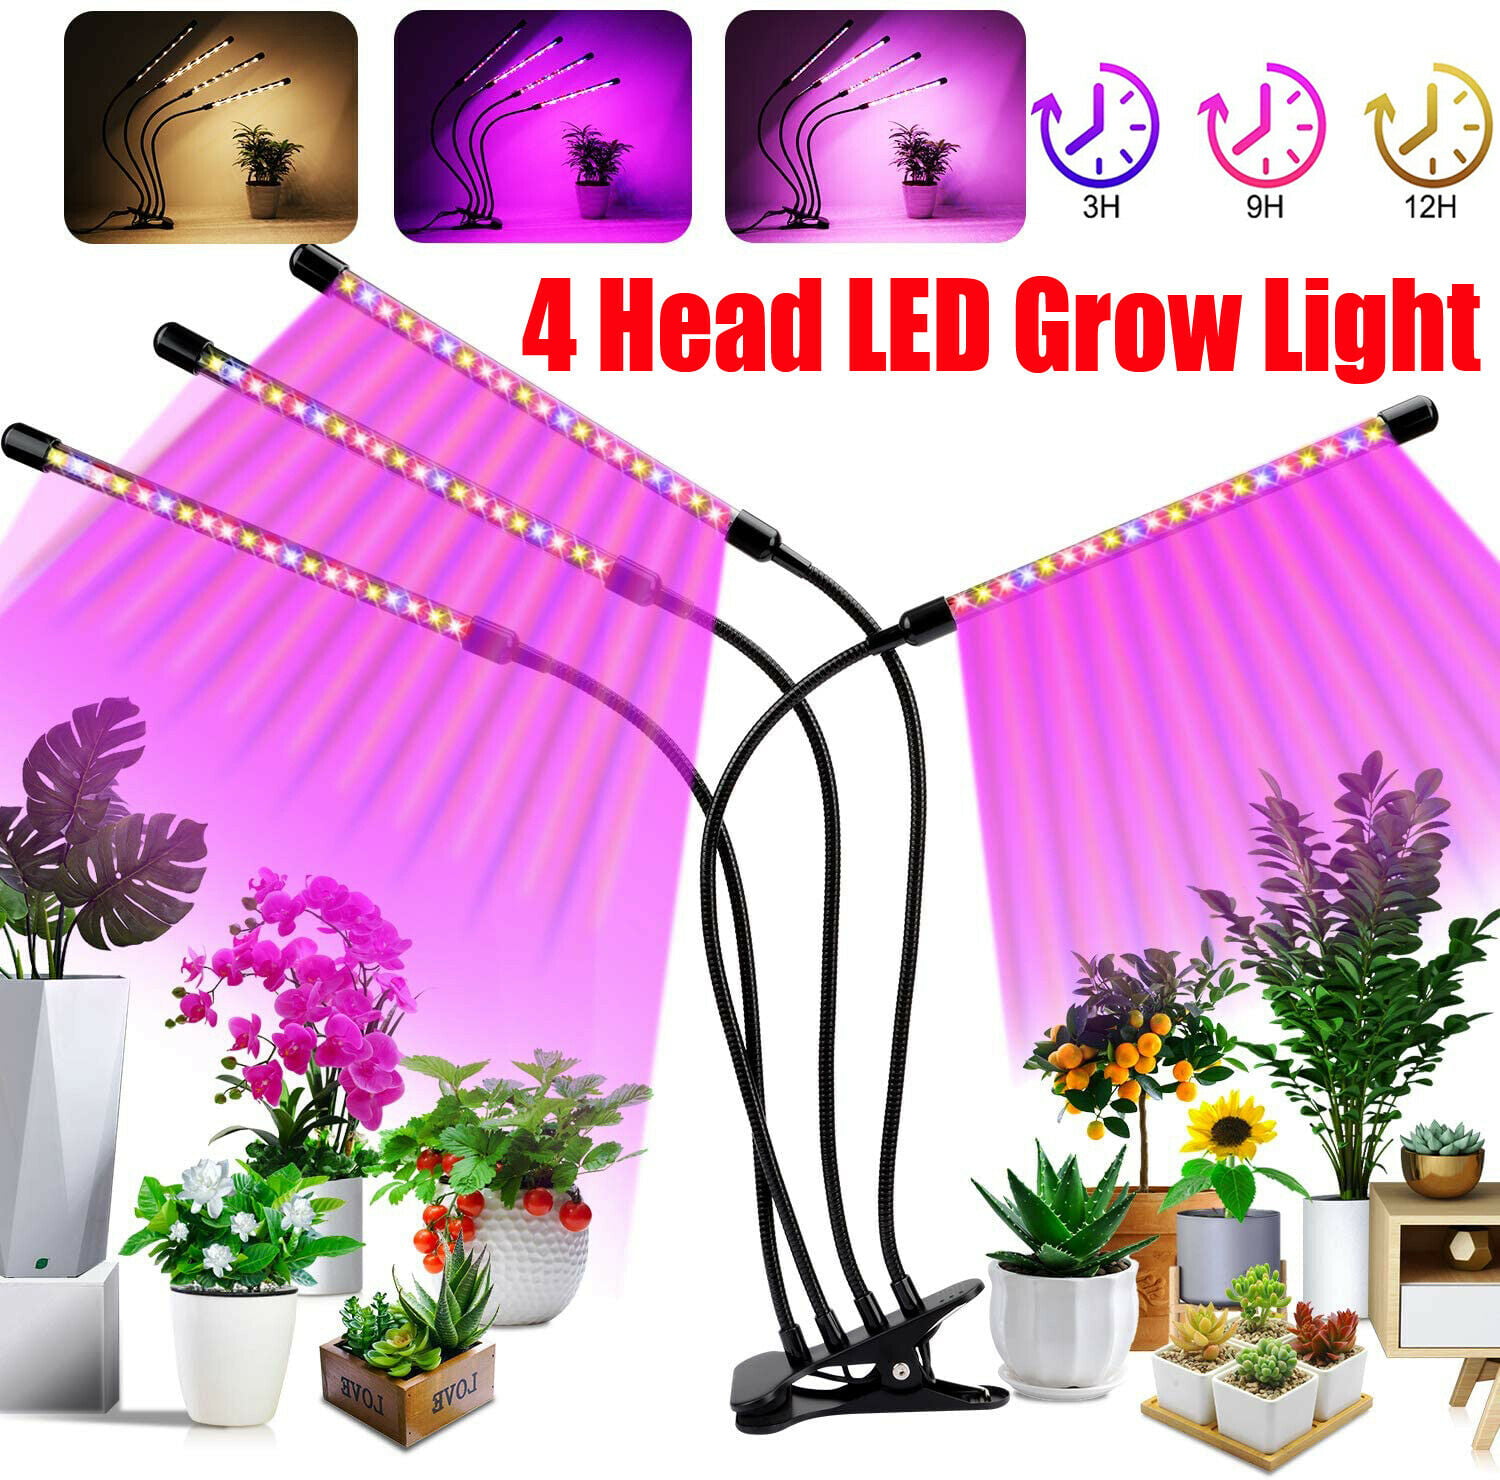 LED Grow Light Plant 2 Head Growing Lamp Lights for Indoor Plants Hydroponics US 